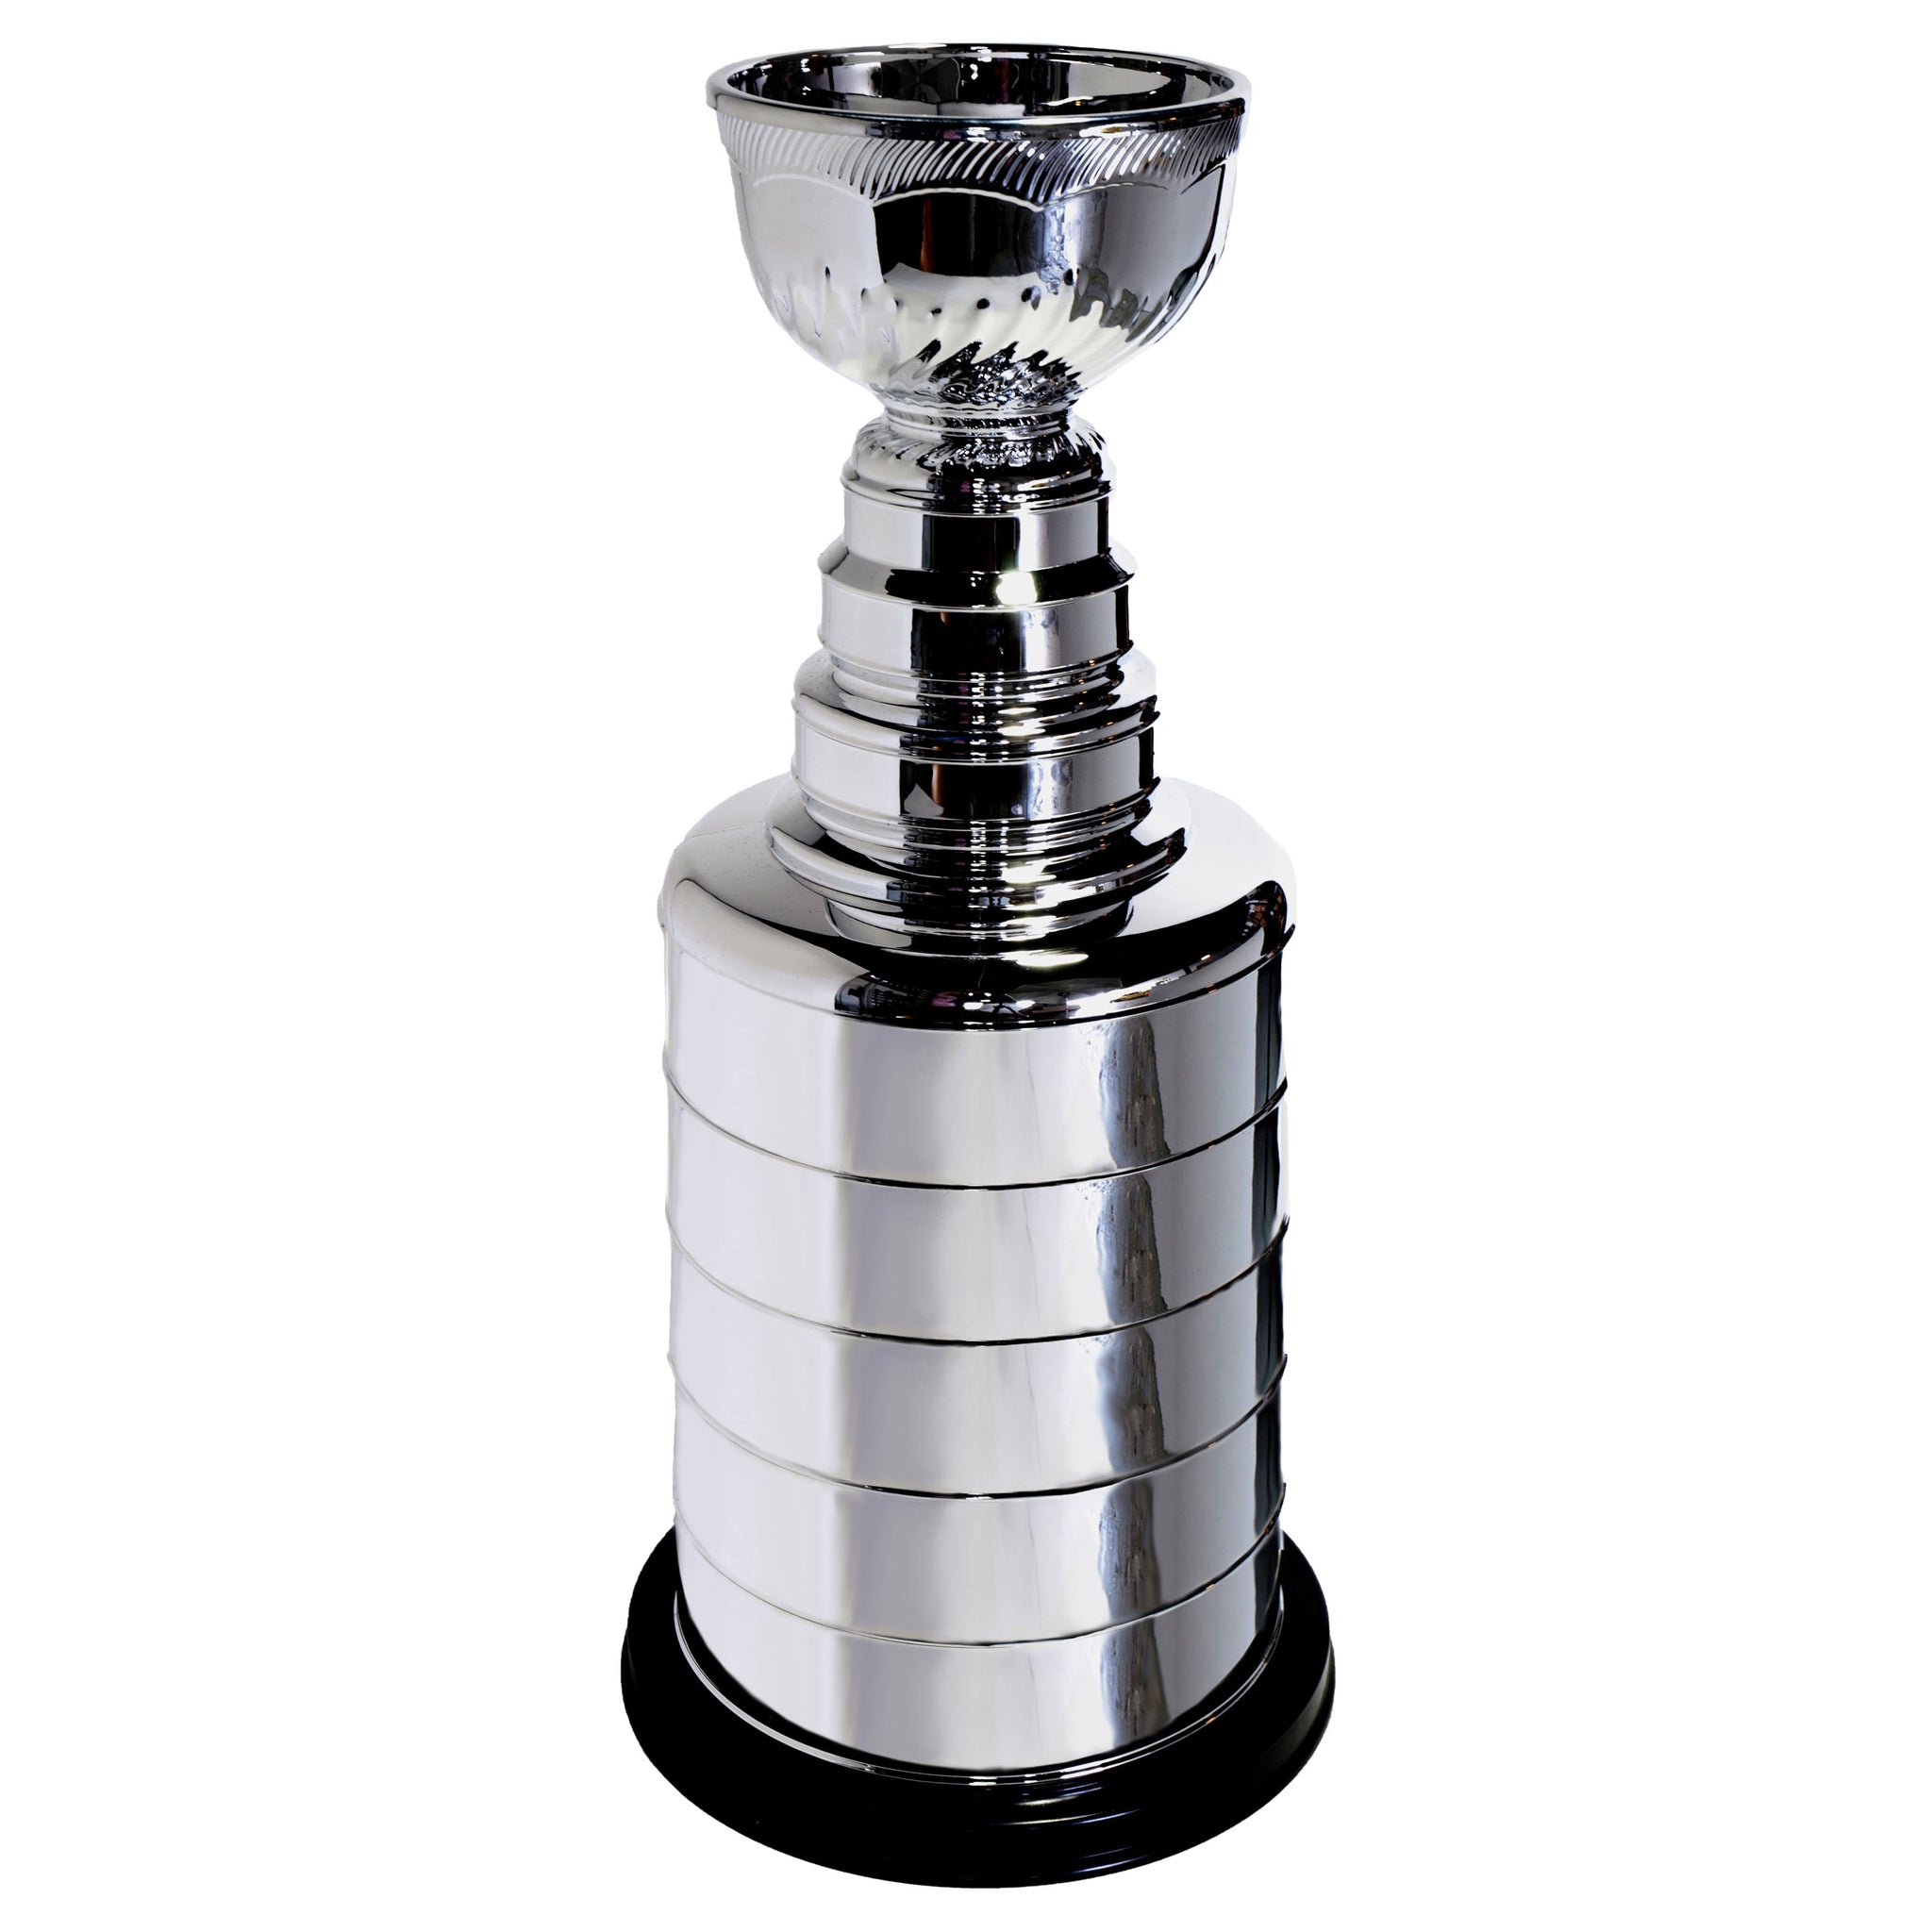 NHL Officially Licensed 25 Replica Stanley Cup Trophy – UPI